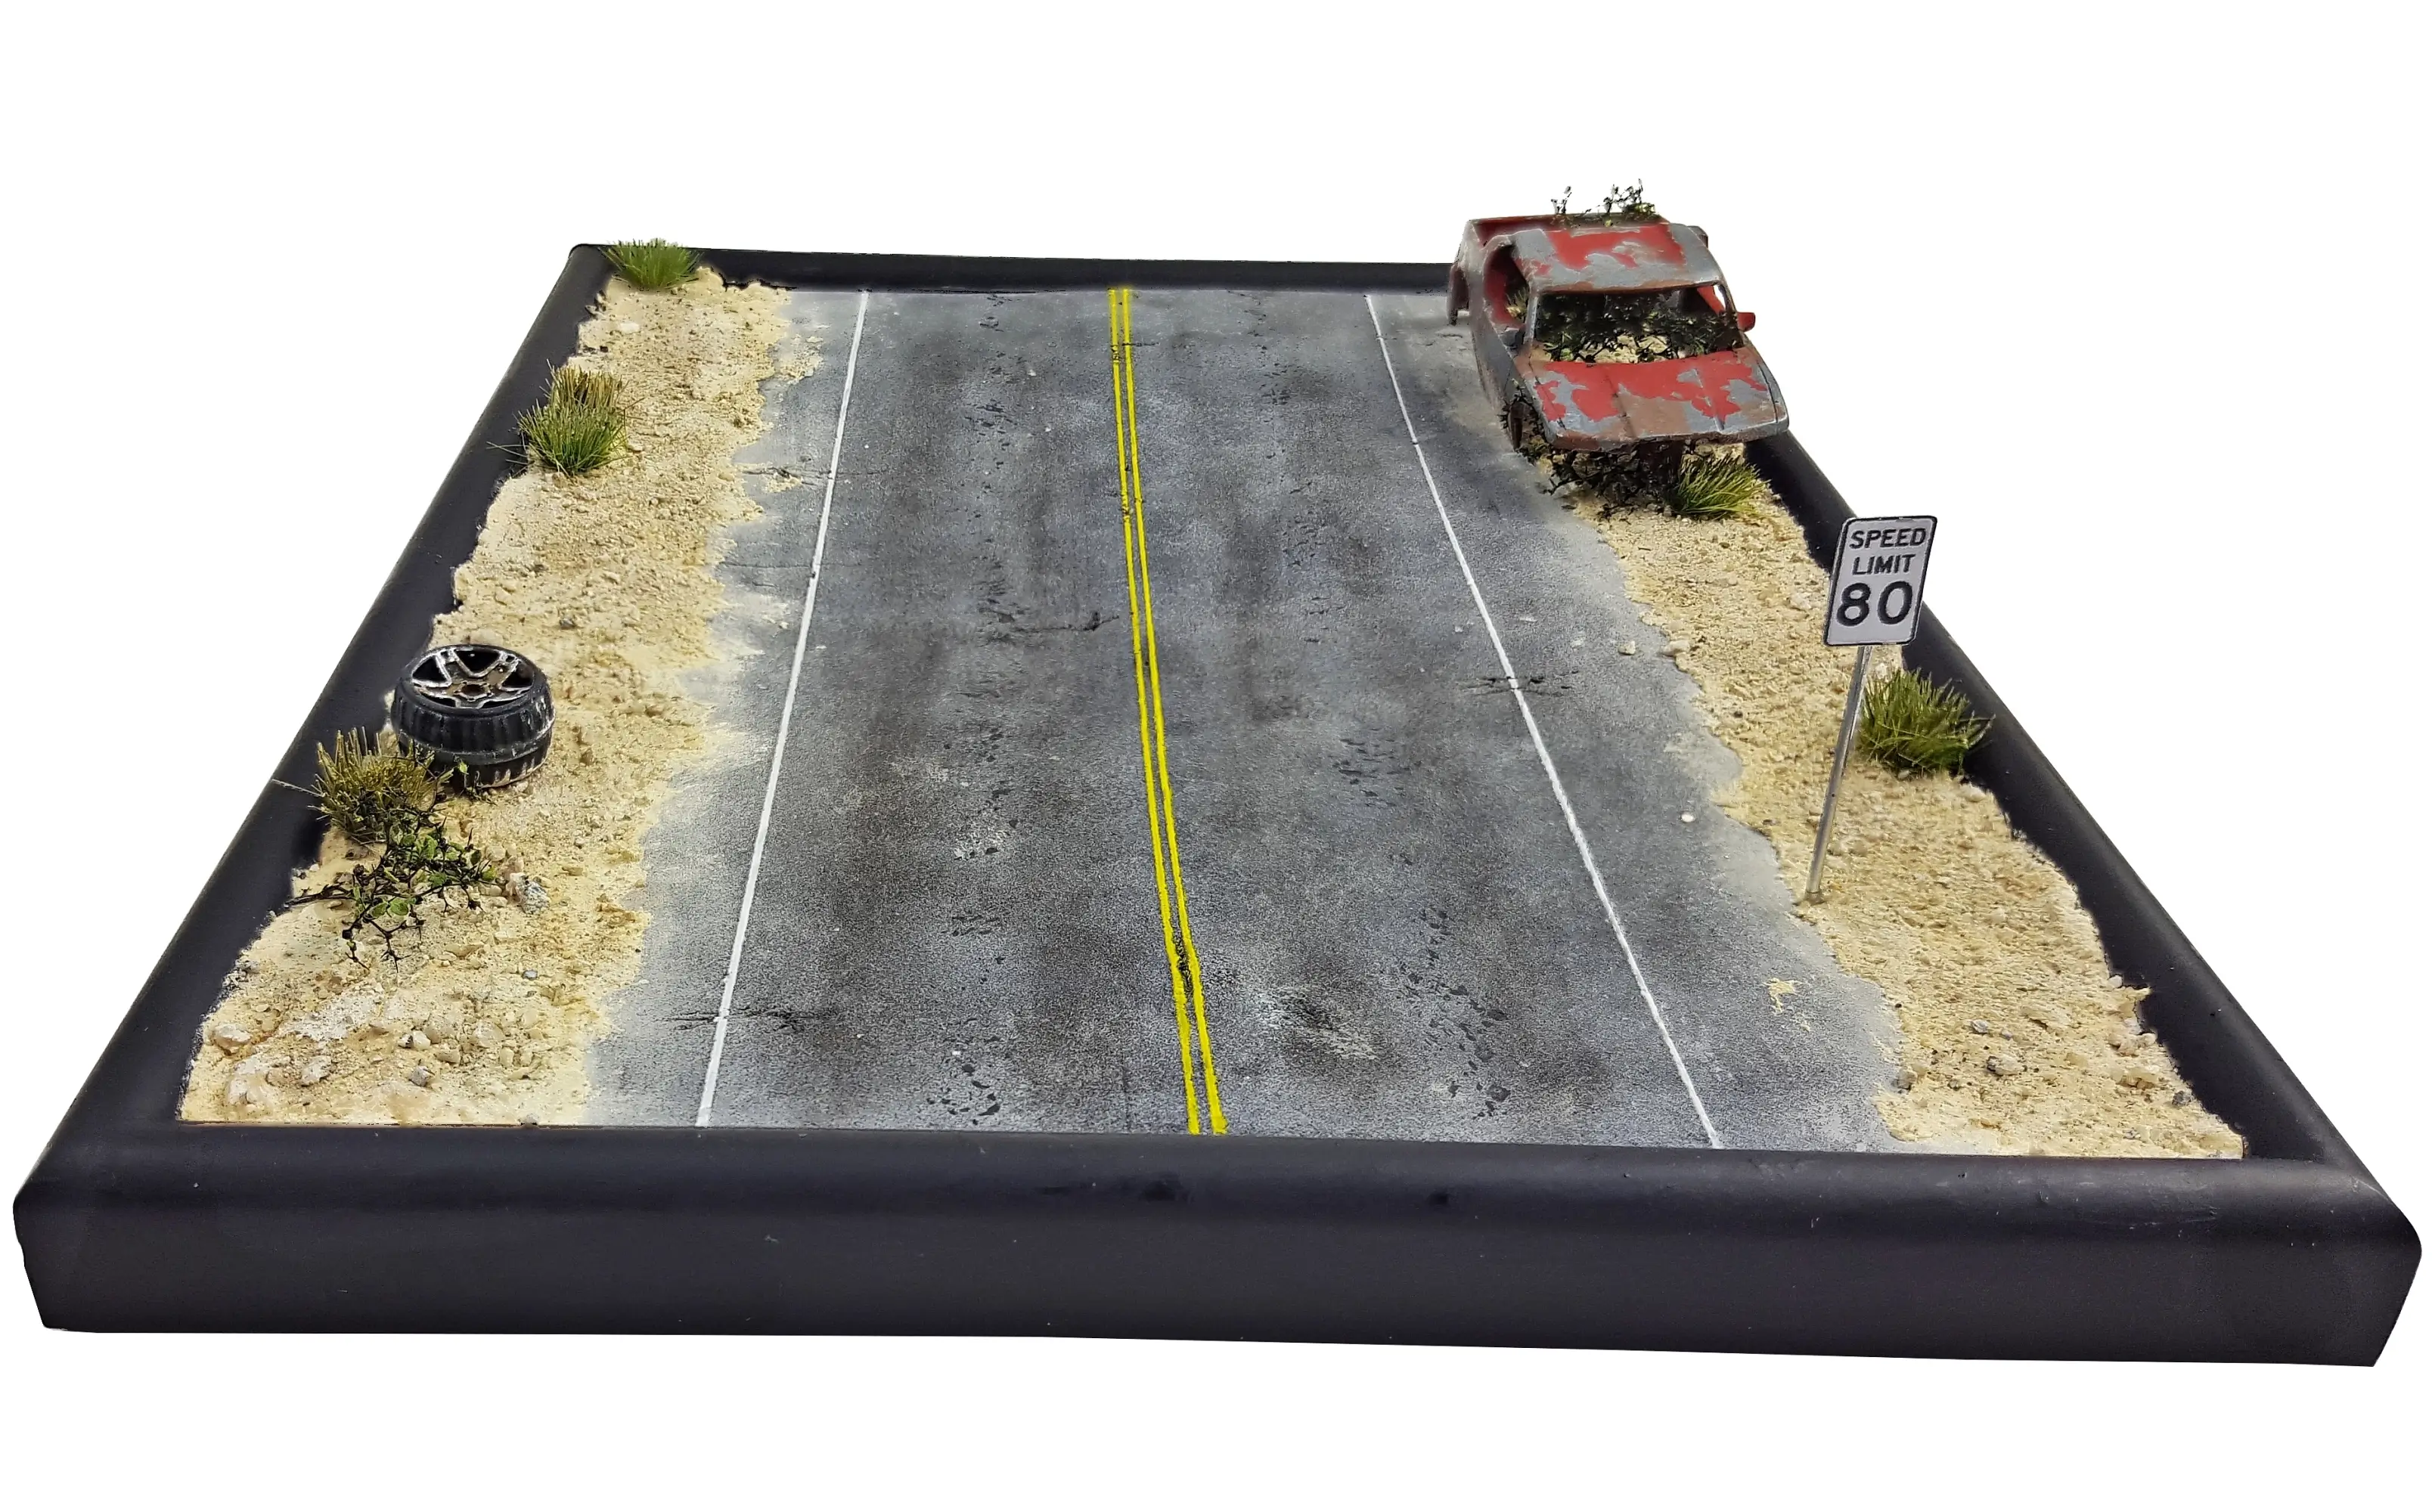 American-style diorama in 1:87 scale